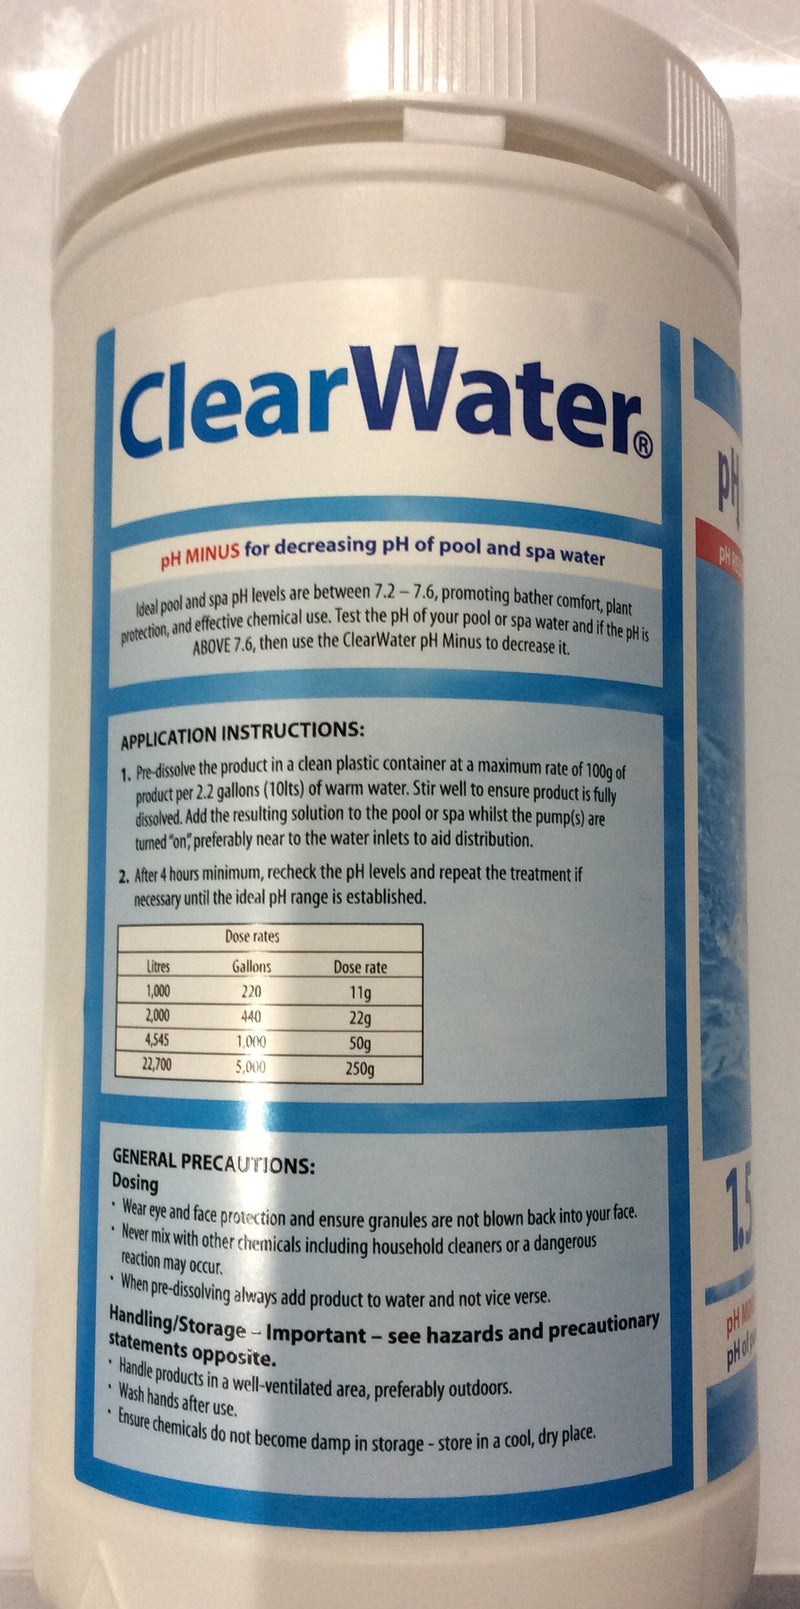 Ph minus for pool, hot tubs and spa 1.5kg sodium hydrogen sulphate